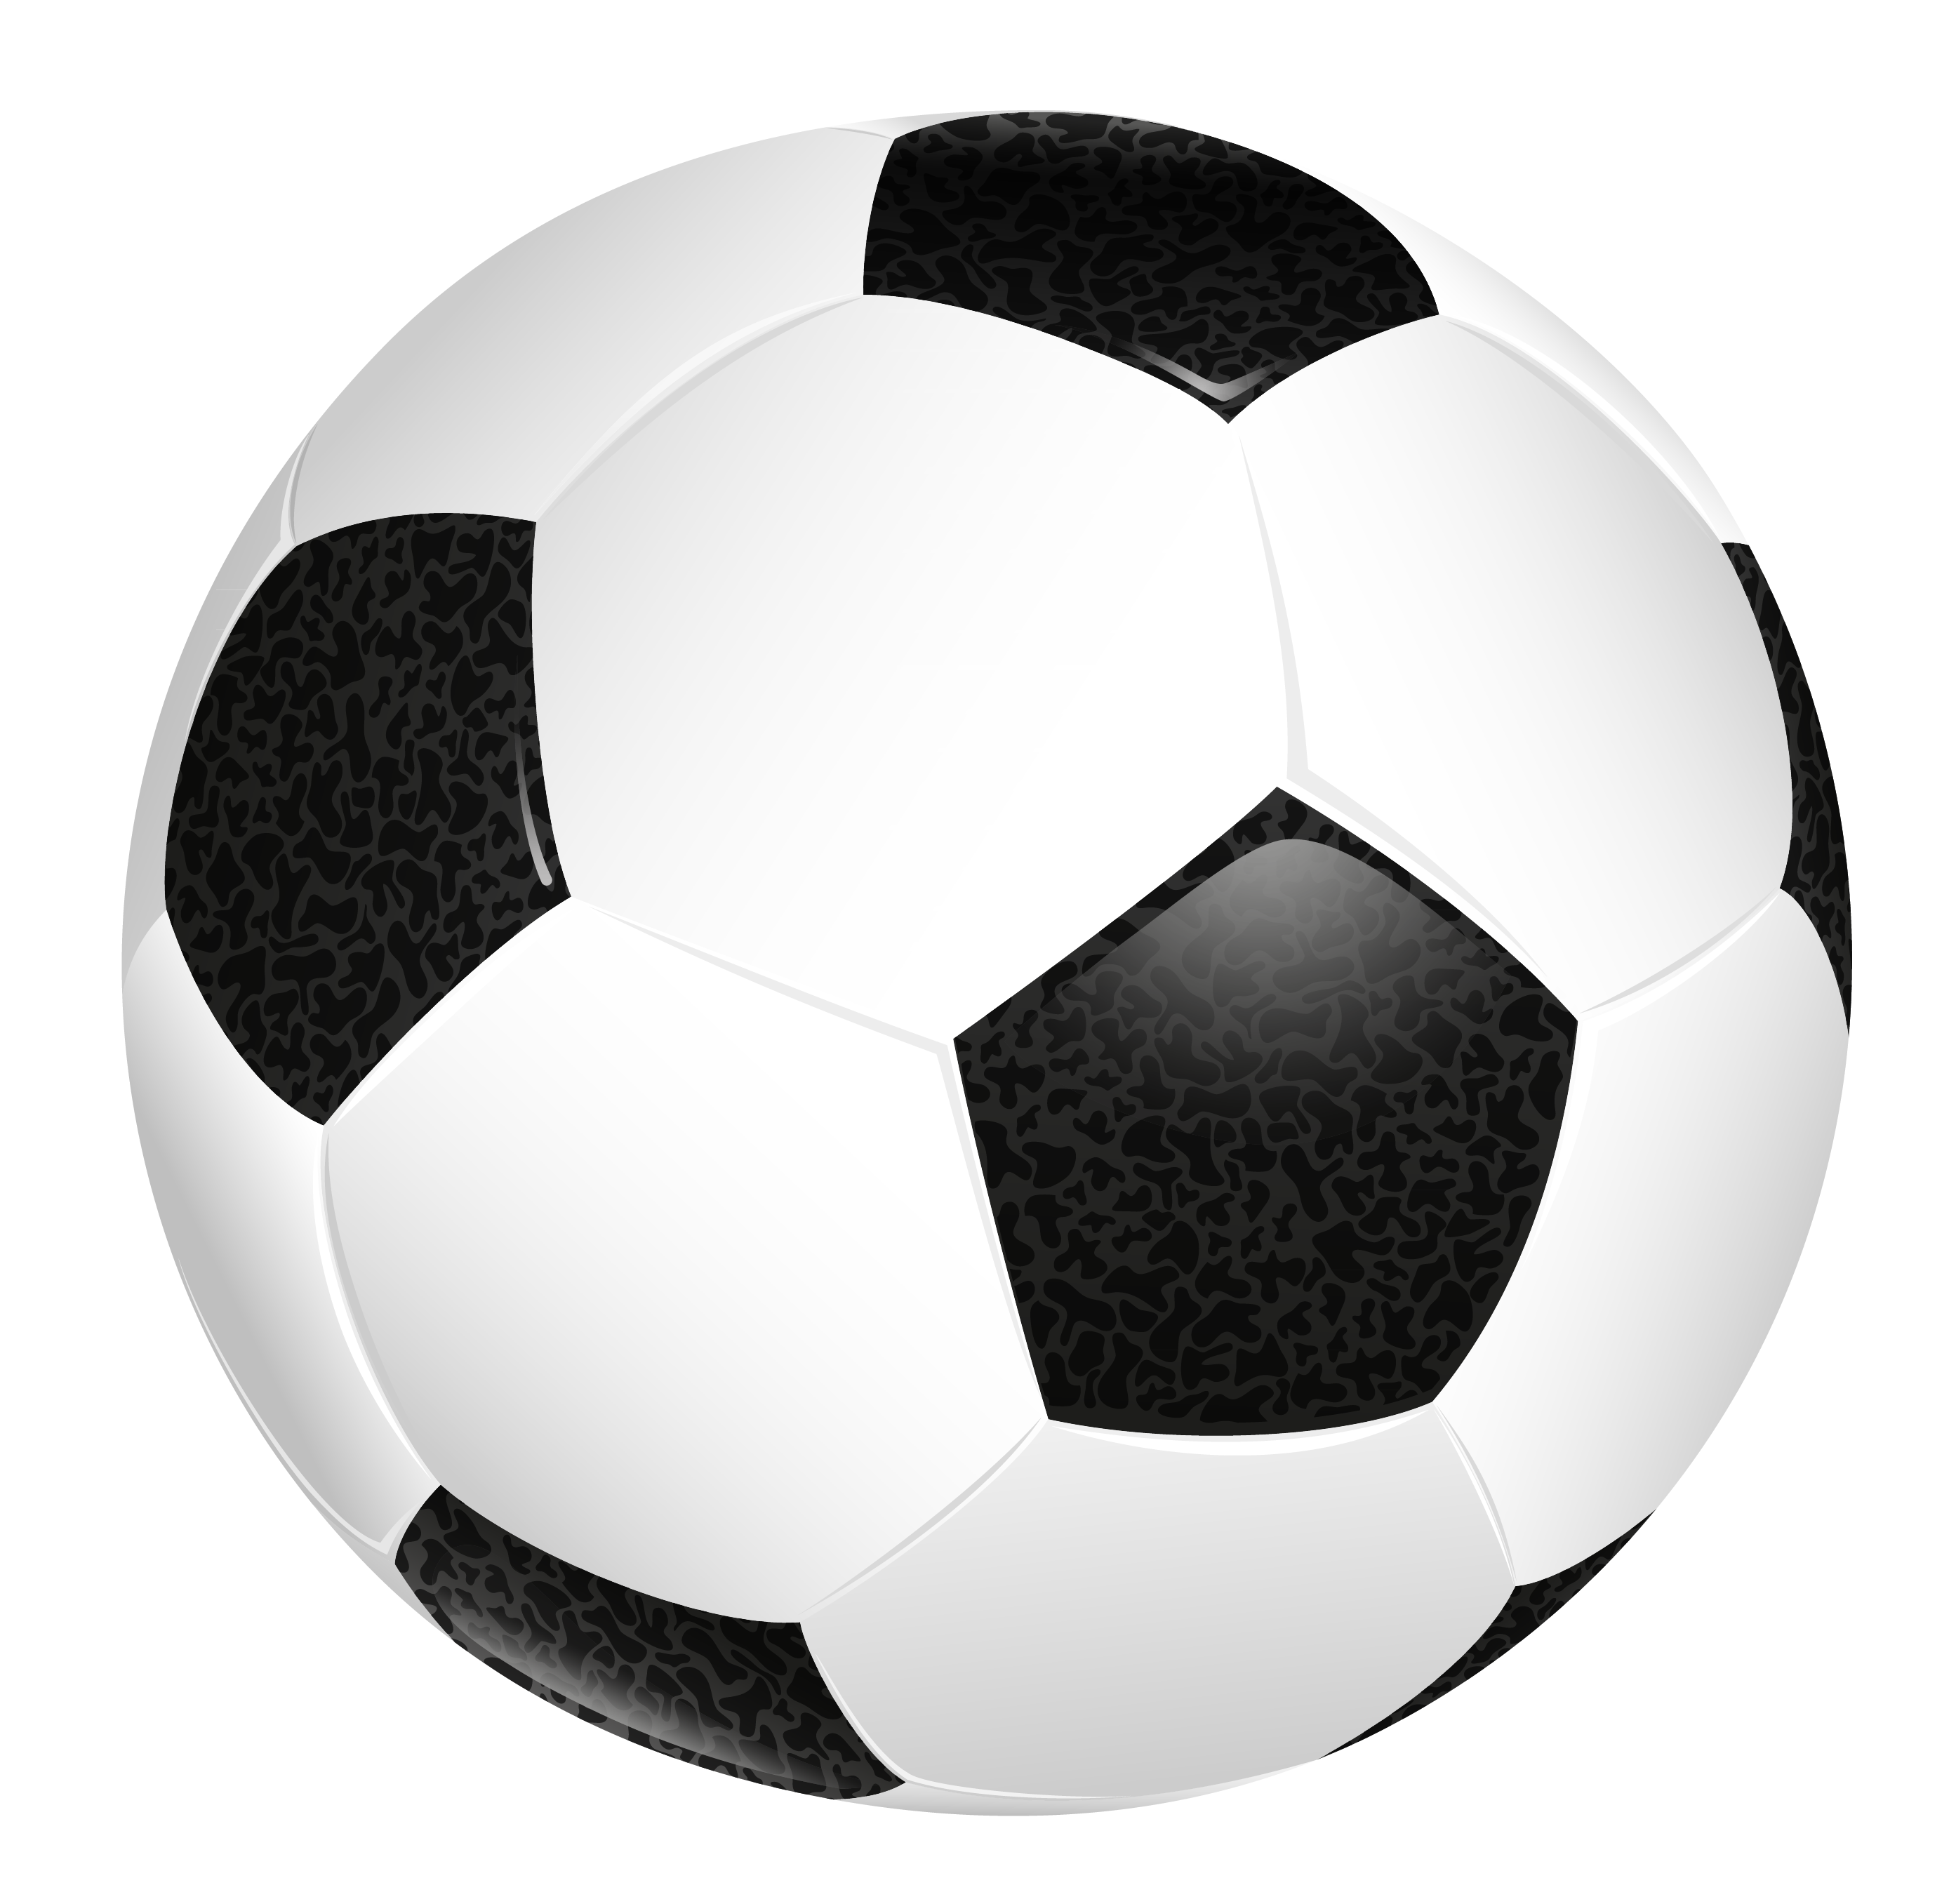 Image Of A Soccer Ball - Cliparts.co